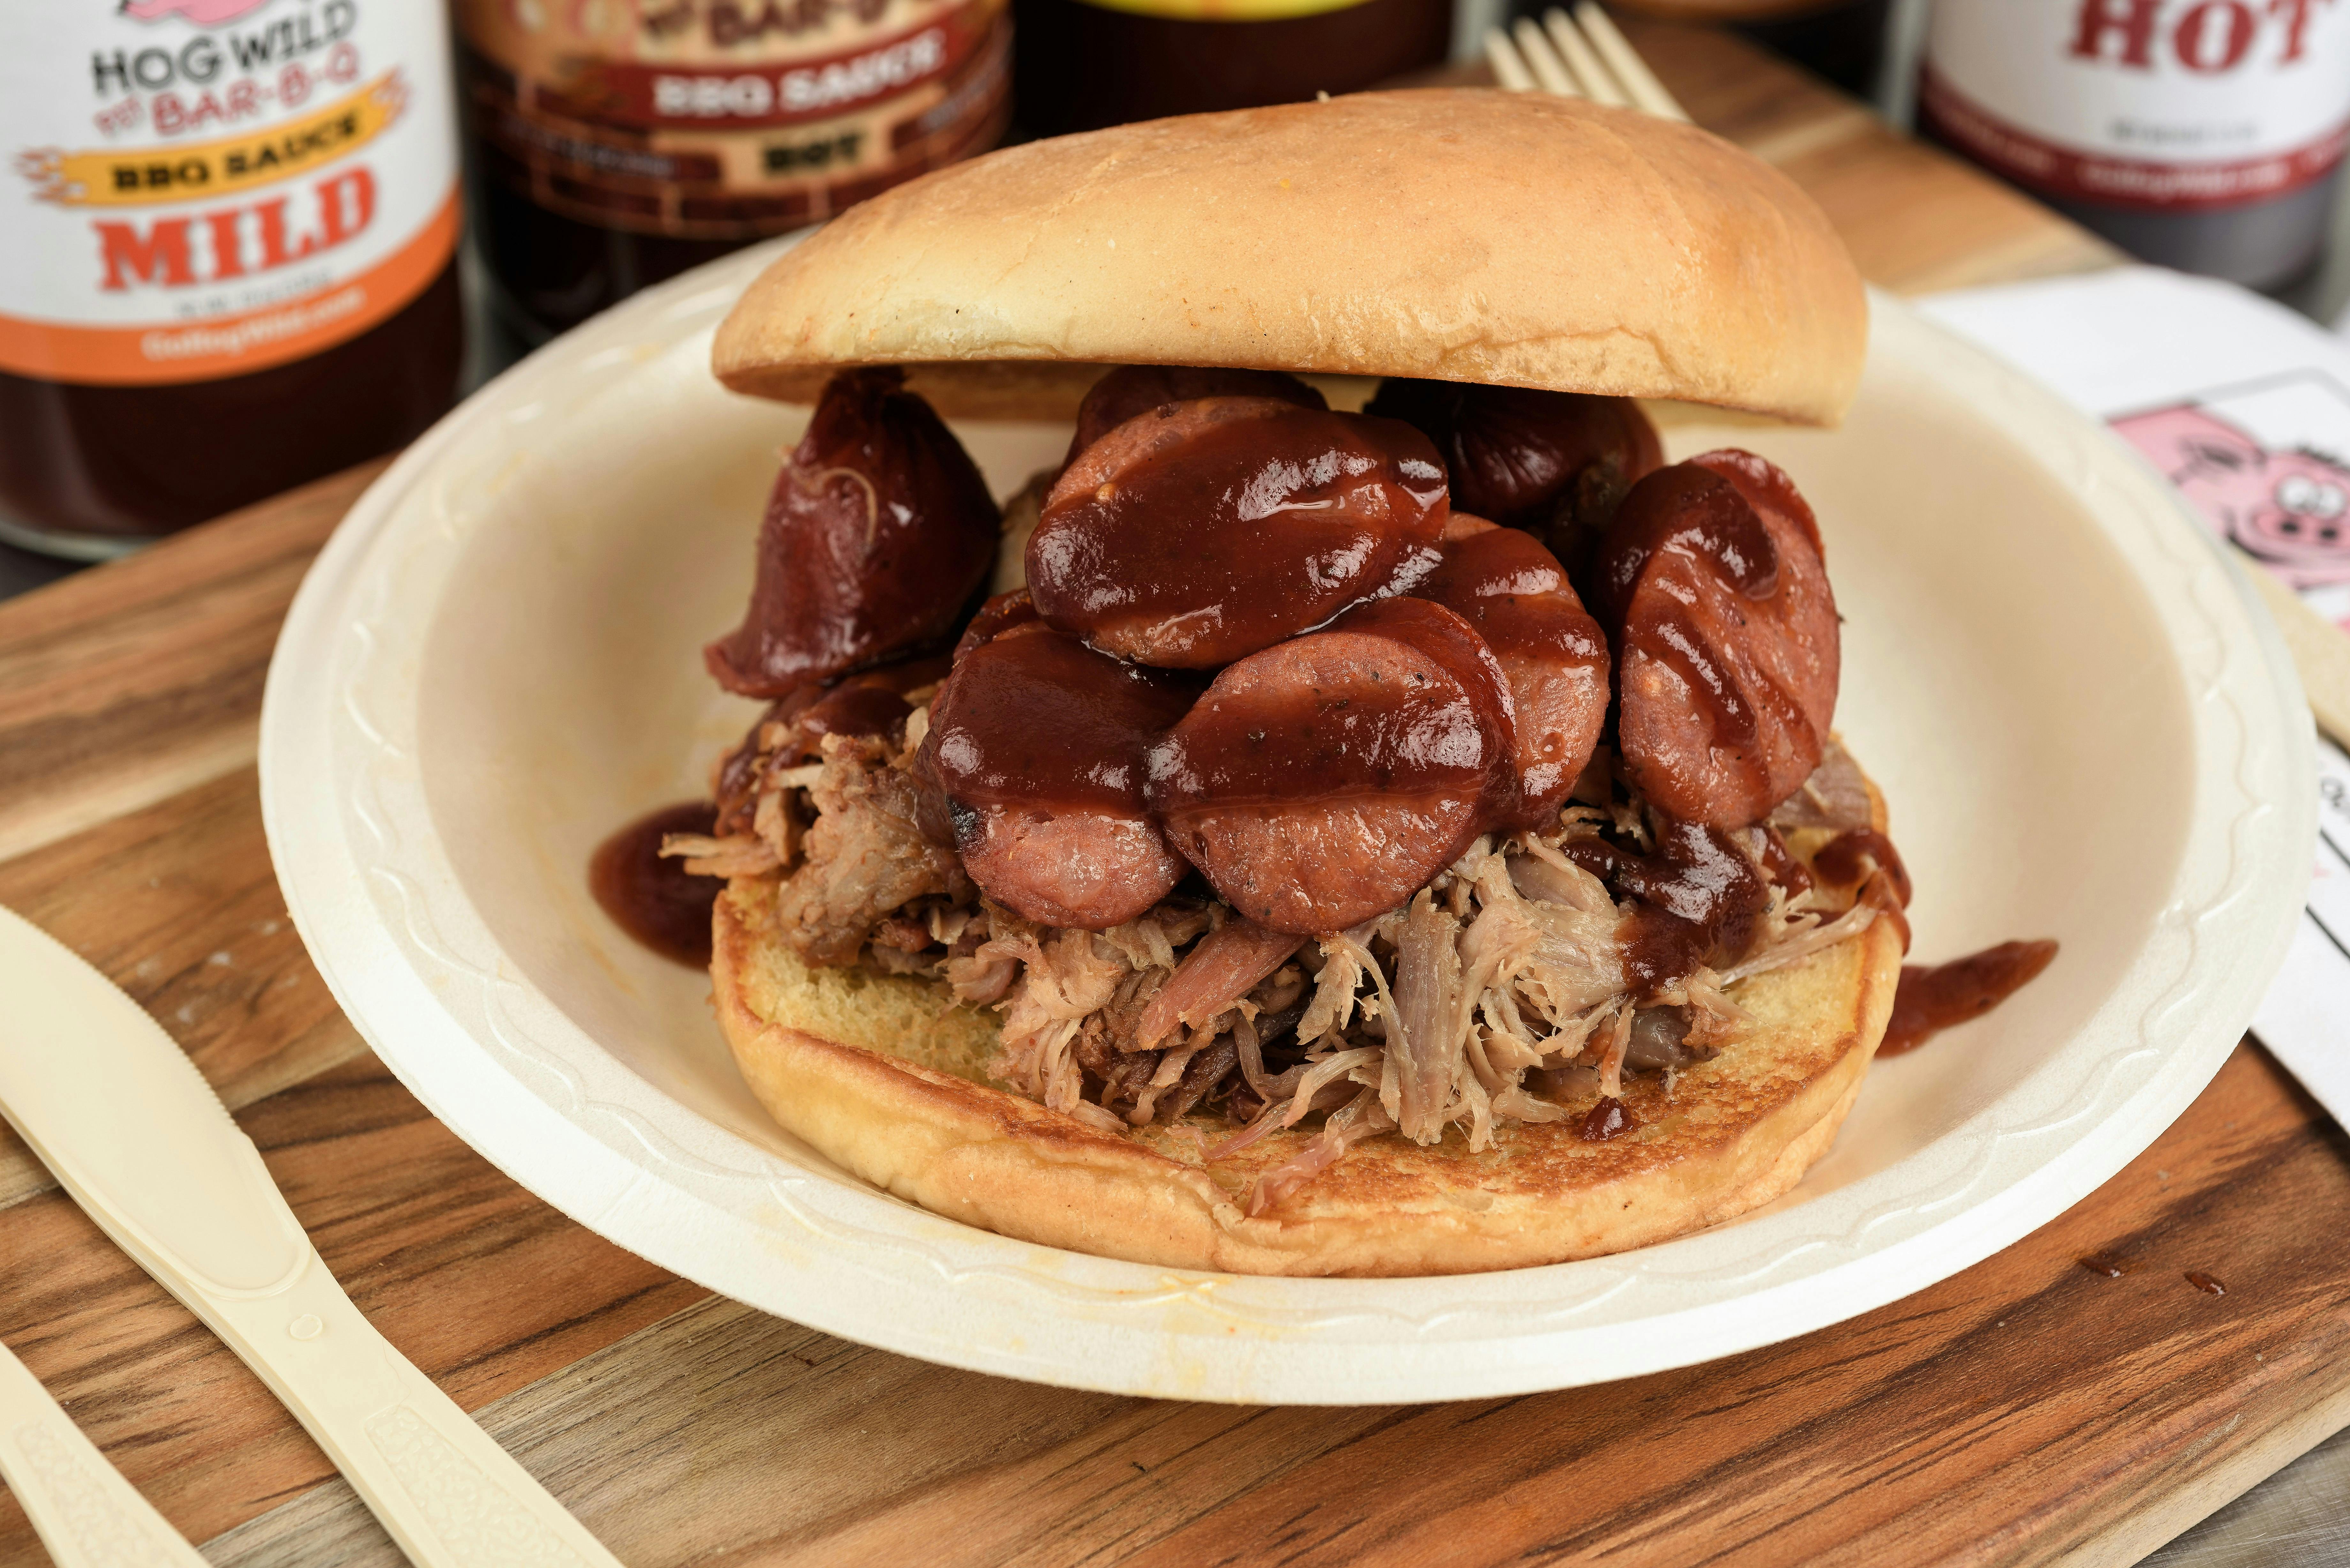 The Wild Hog Sandwich from Hog Wild Pit BBQ & Catering in Lawrence, KS